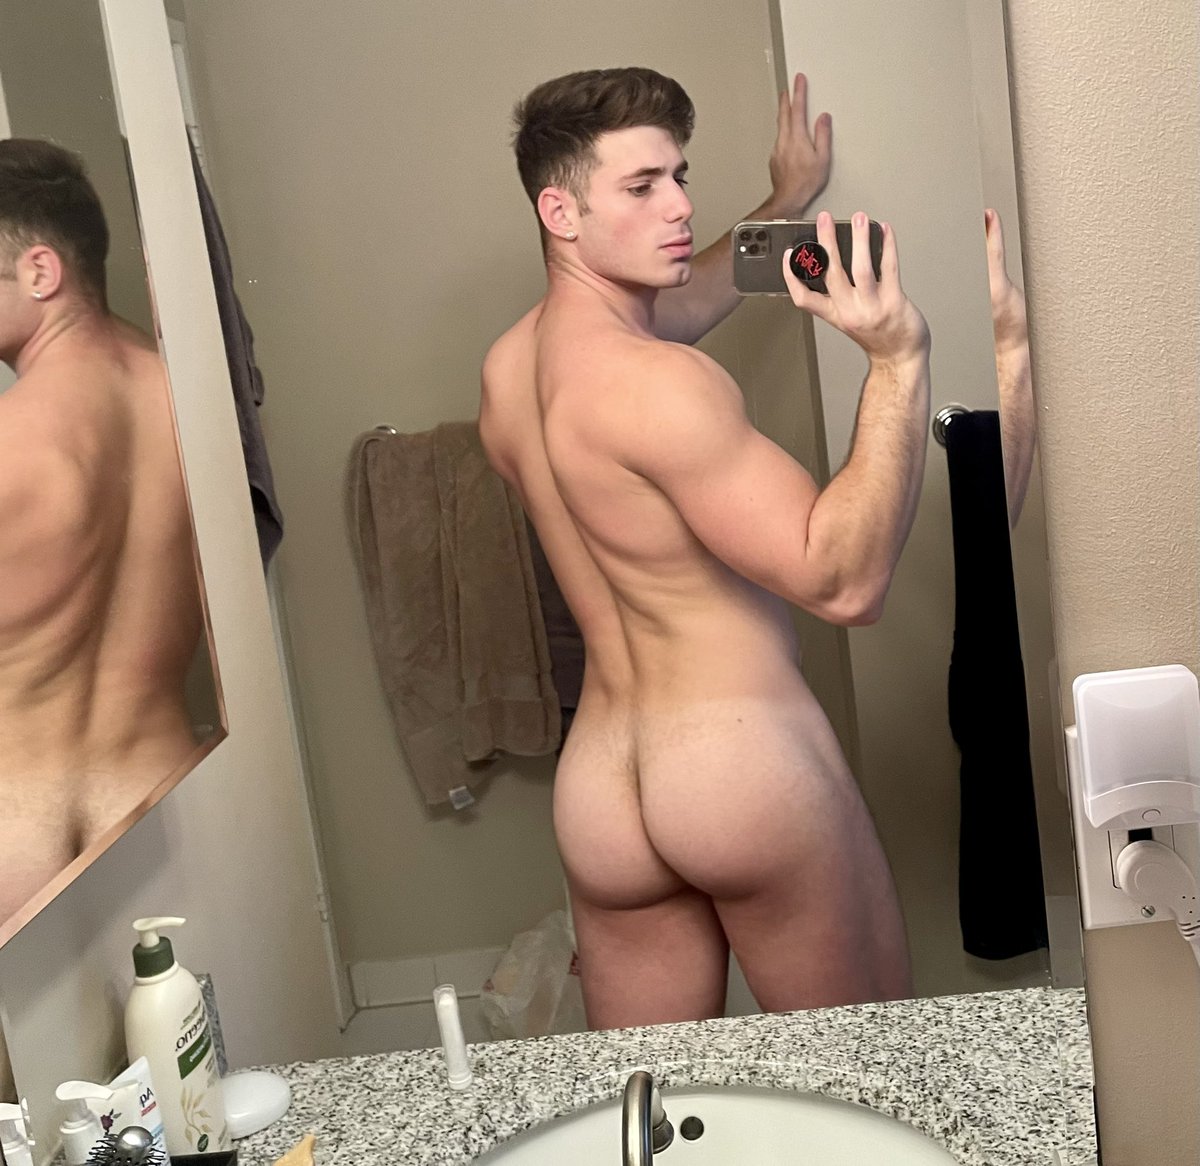 Kiss my tan lines -----http://Onlyfans.com/AlexGrant.